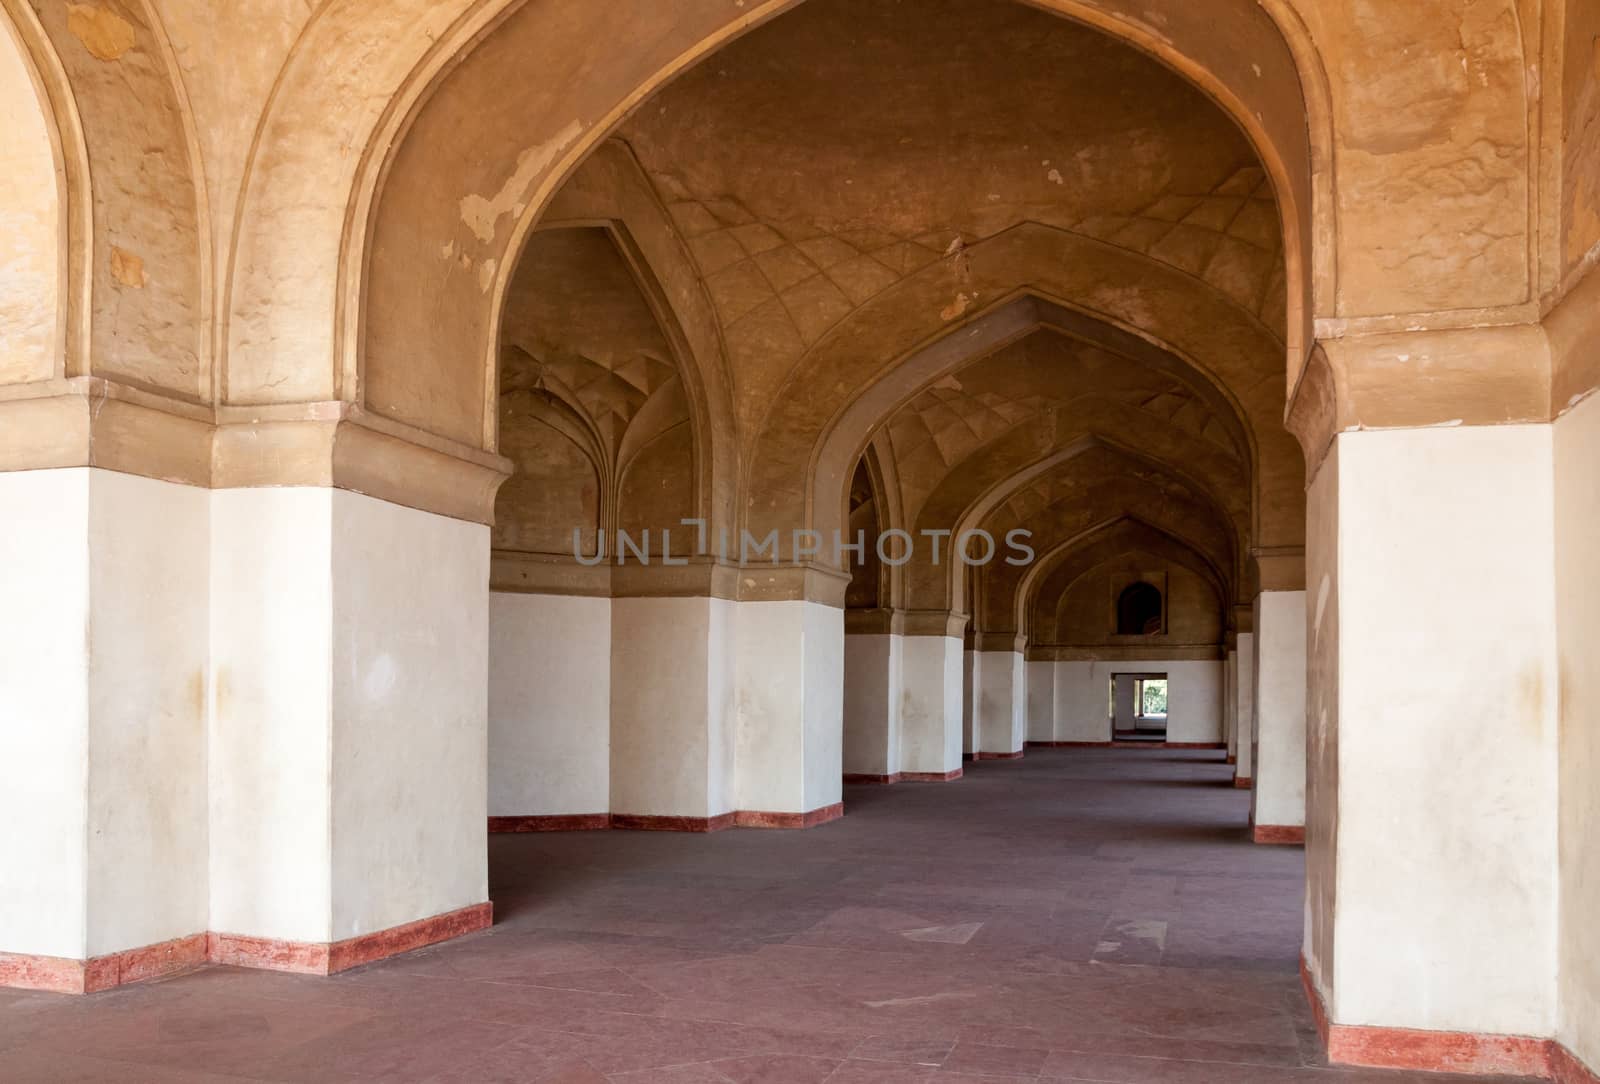 Symmetrical Arches in Typical Moghal style in a row present a geometrical design.